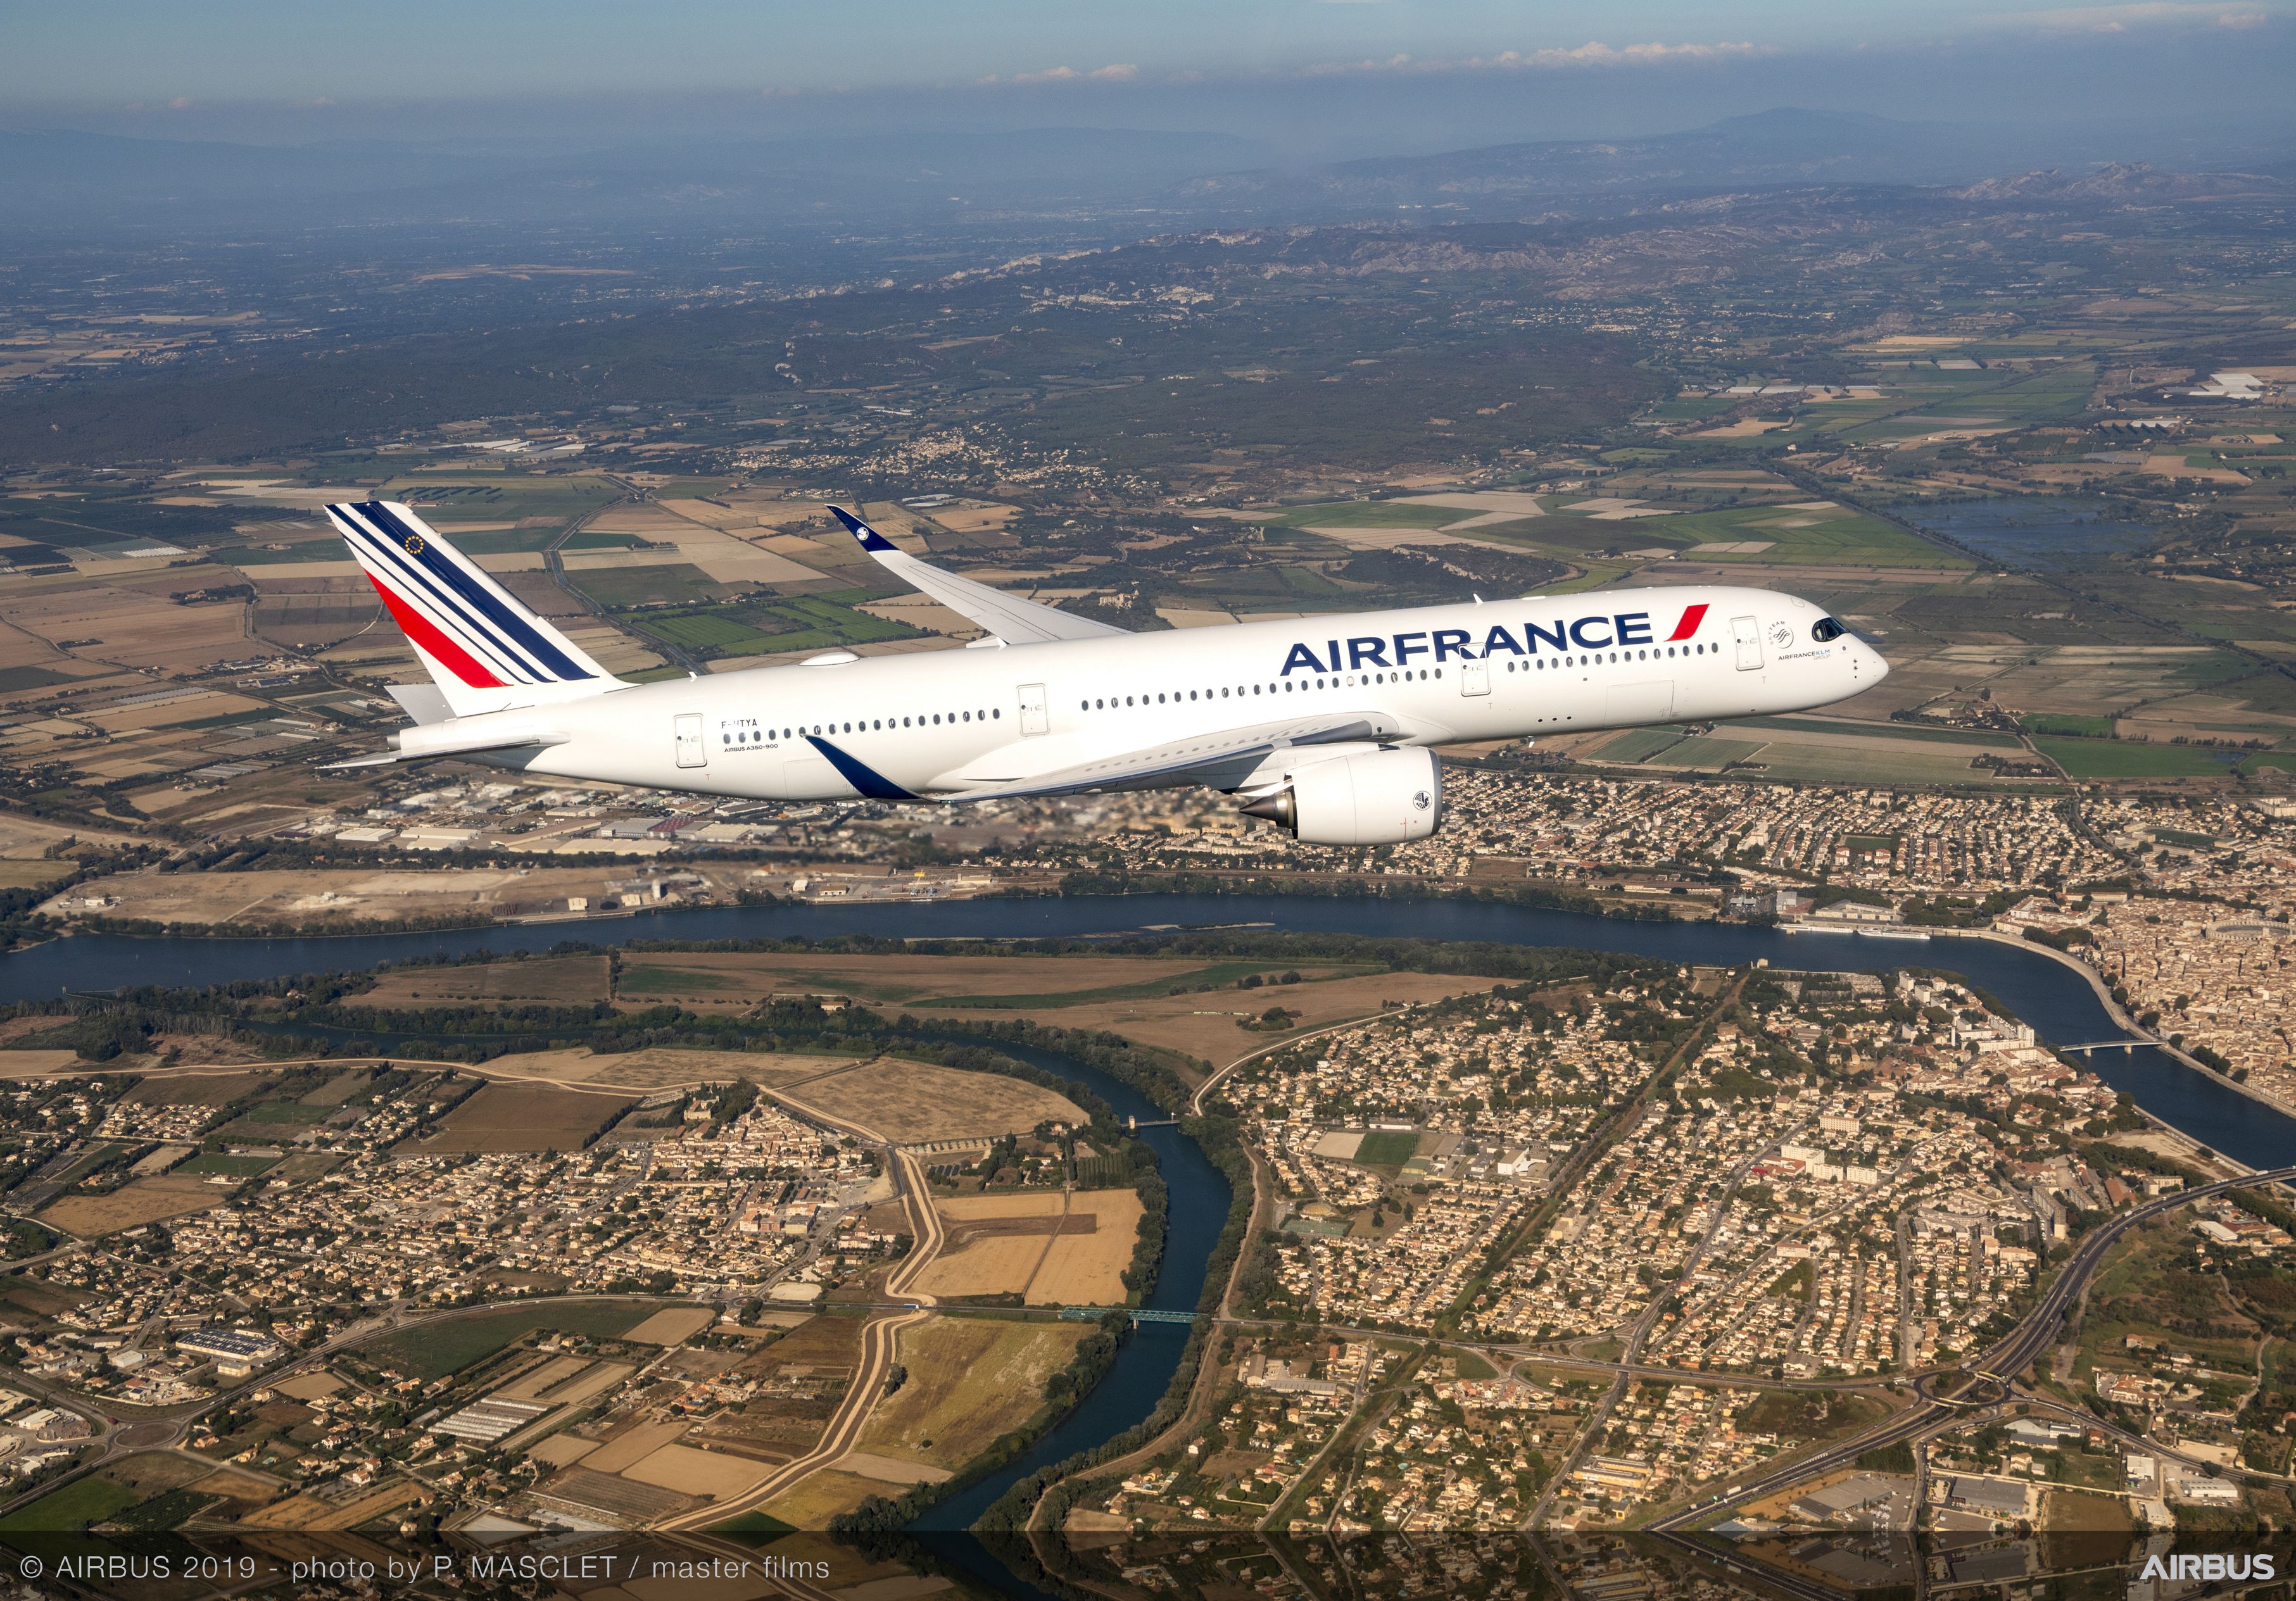 Air France to Significantly Increase Flights and Return 22 Planes to Service